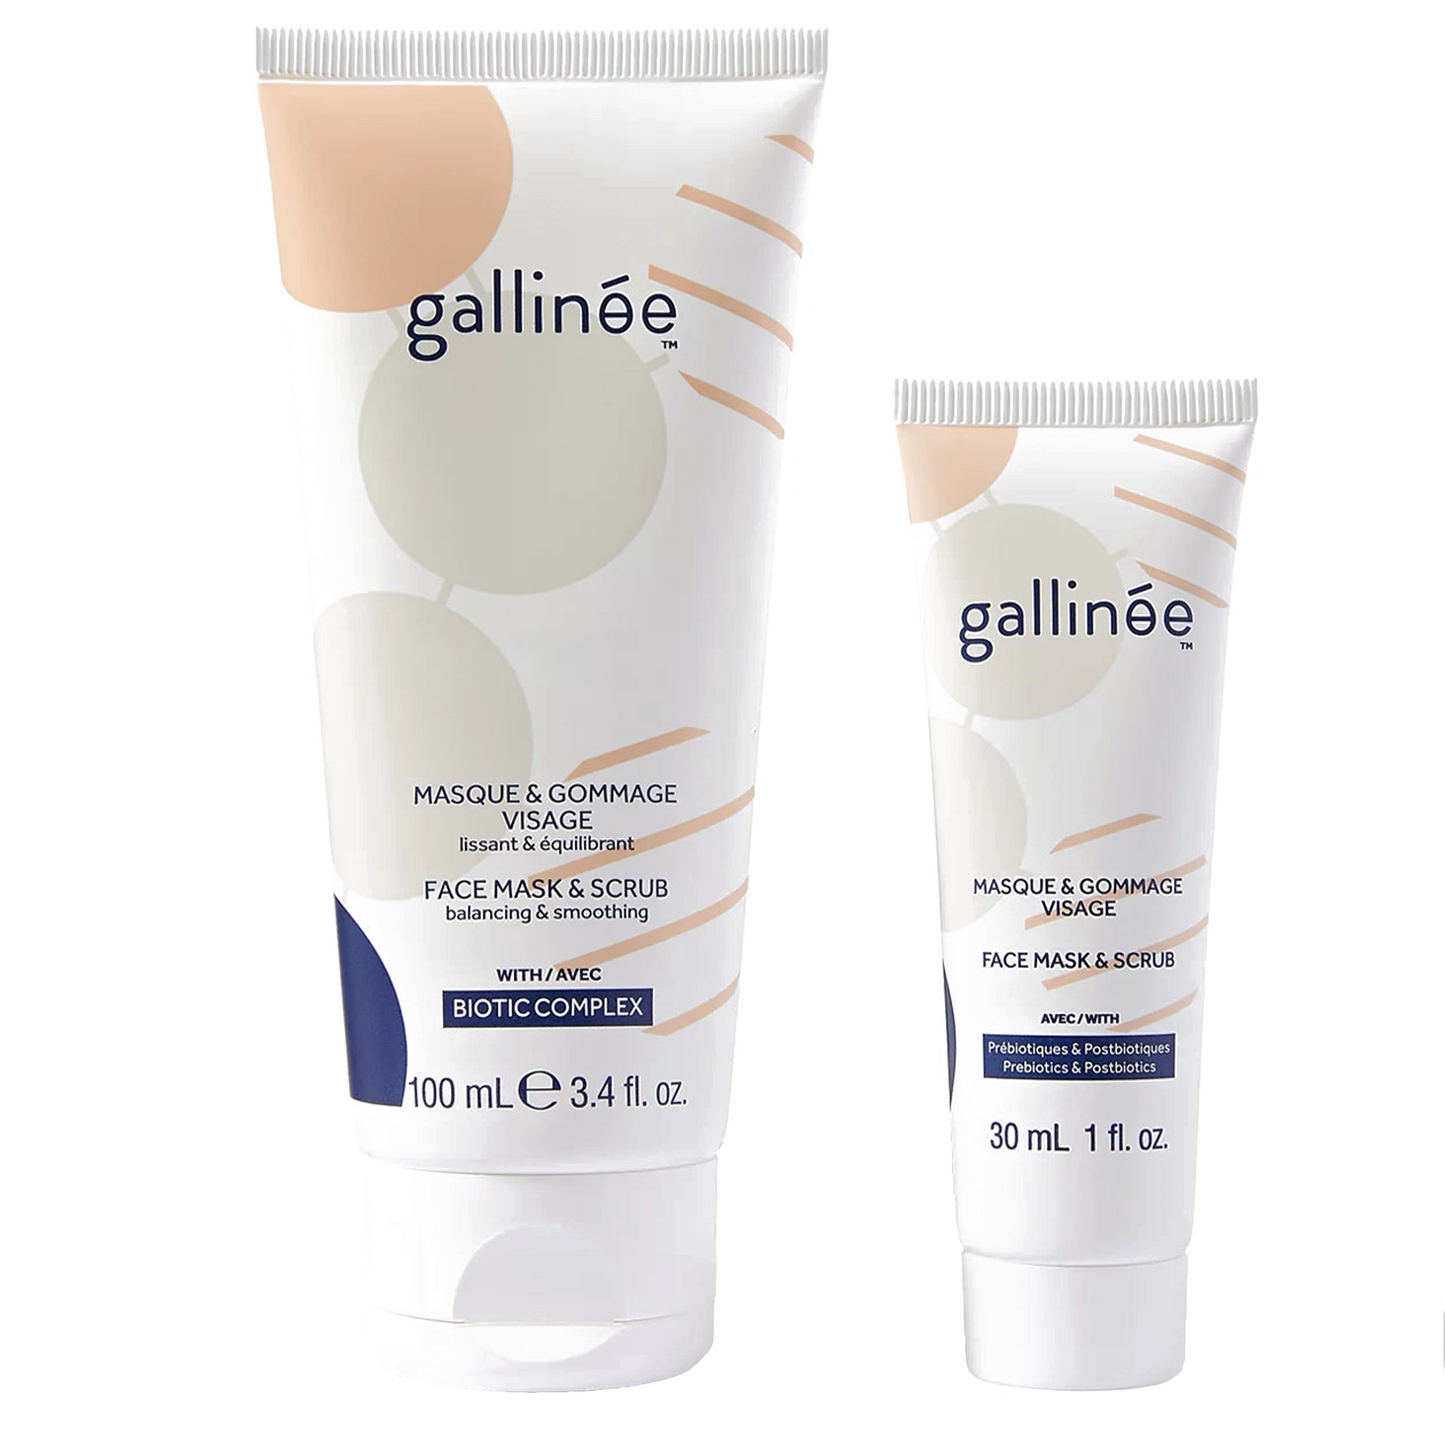 Gallinee Prebiotic Face Mask-Scrub: 5 minutes to brightness!  A gentle scrub-in-mask that leaves your skin purified and refined, and pores looking smaller.  White clay, prebiotics and lactic acid help support the skin microbiome.